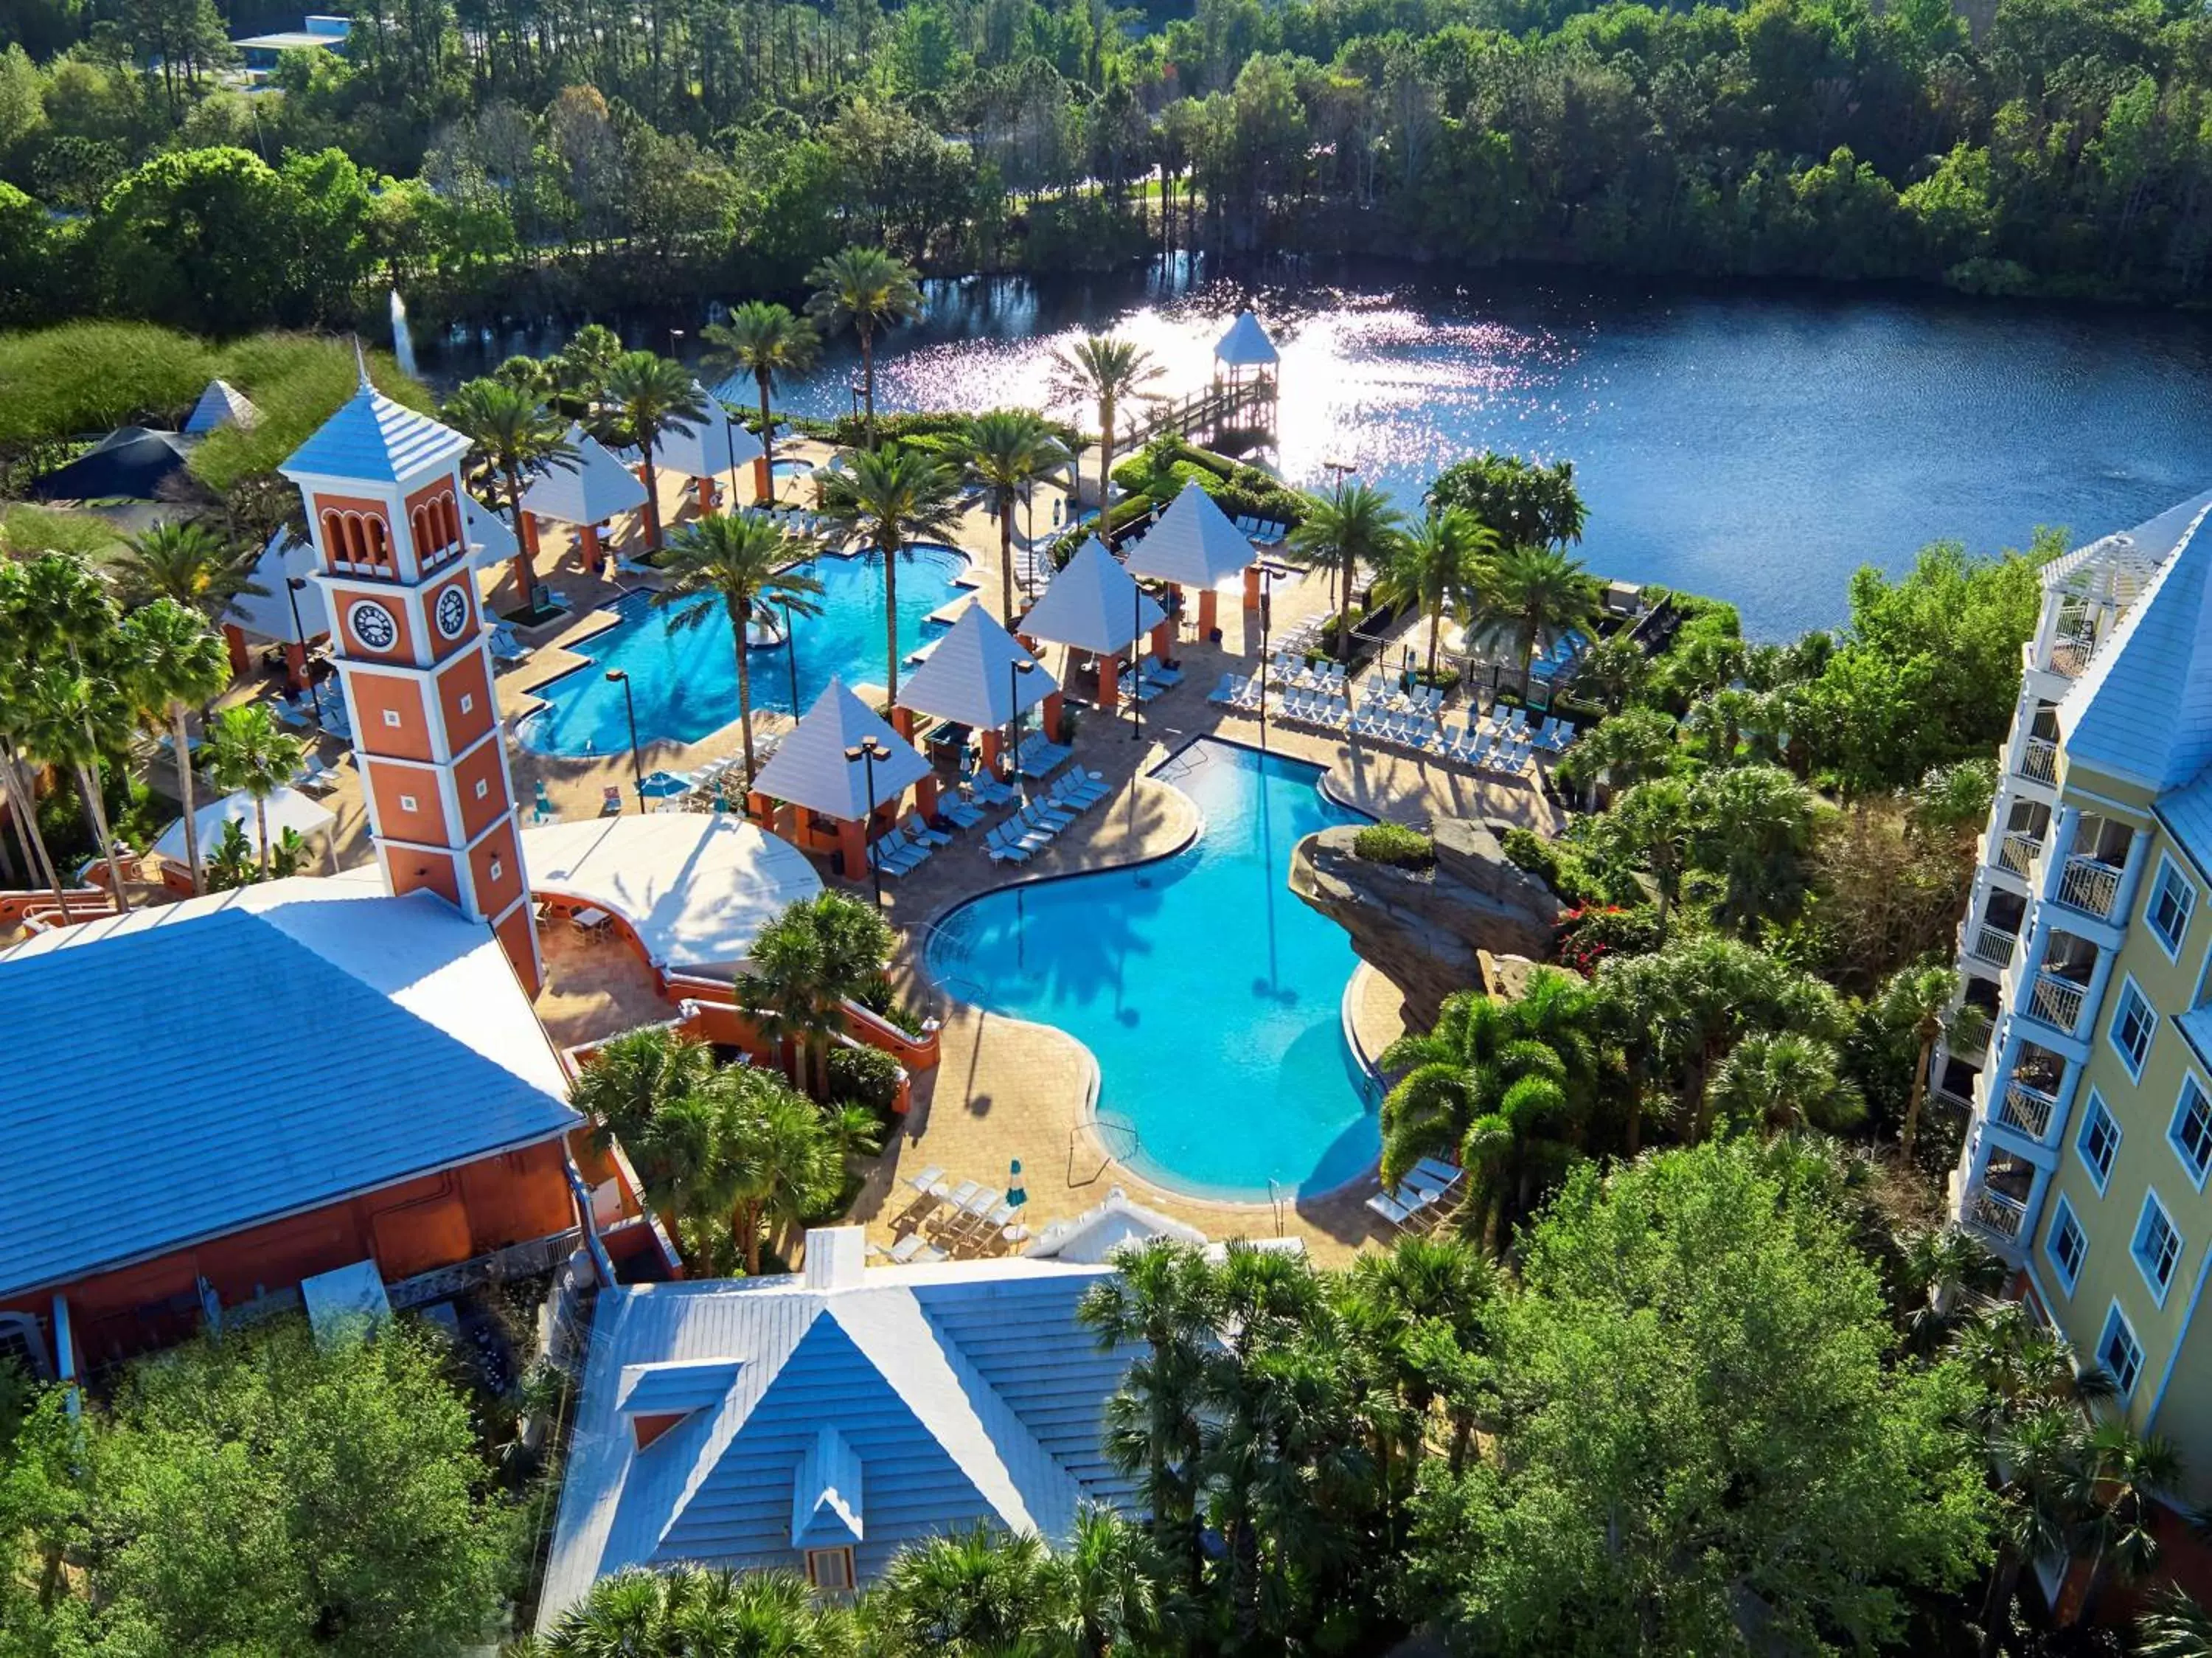 Property building, Pool View in Hilton Grand Vacations Club SeaWorld Orlando